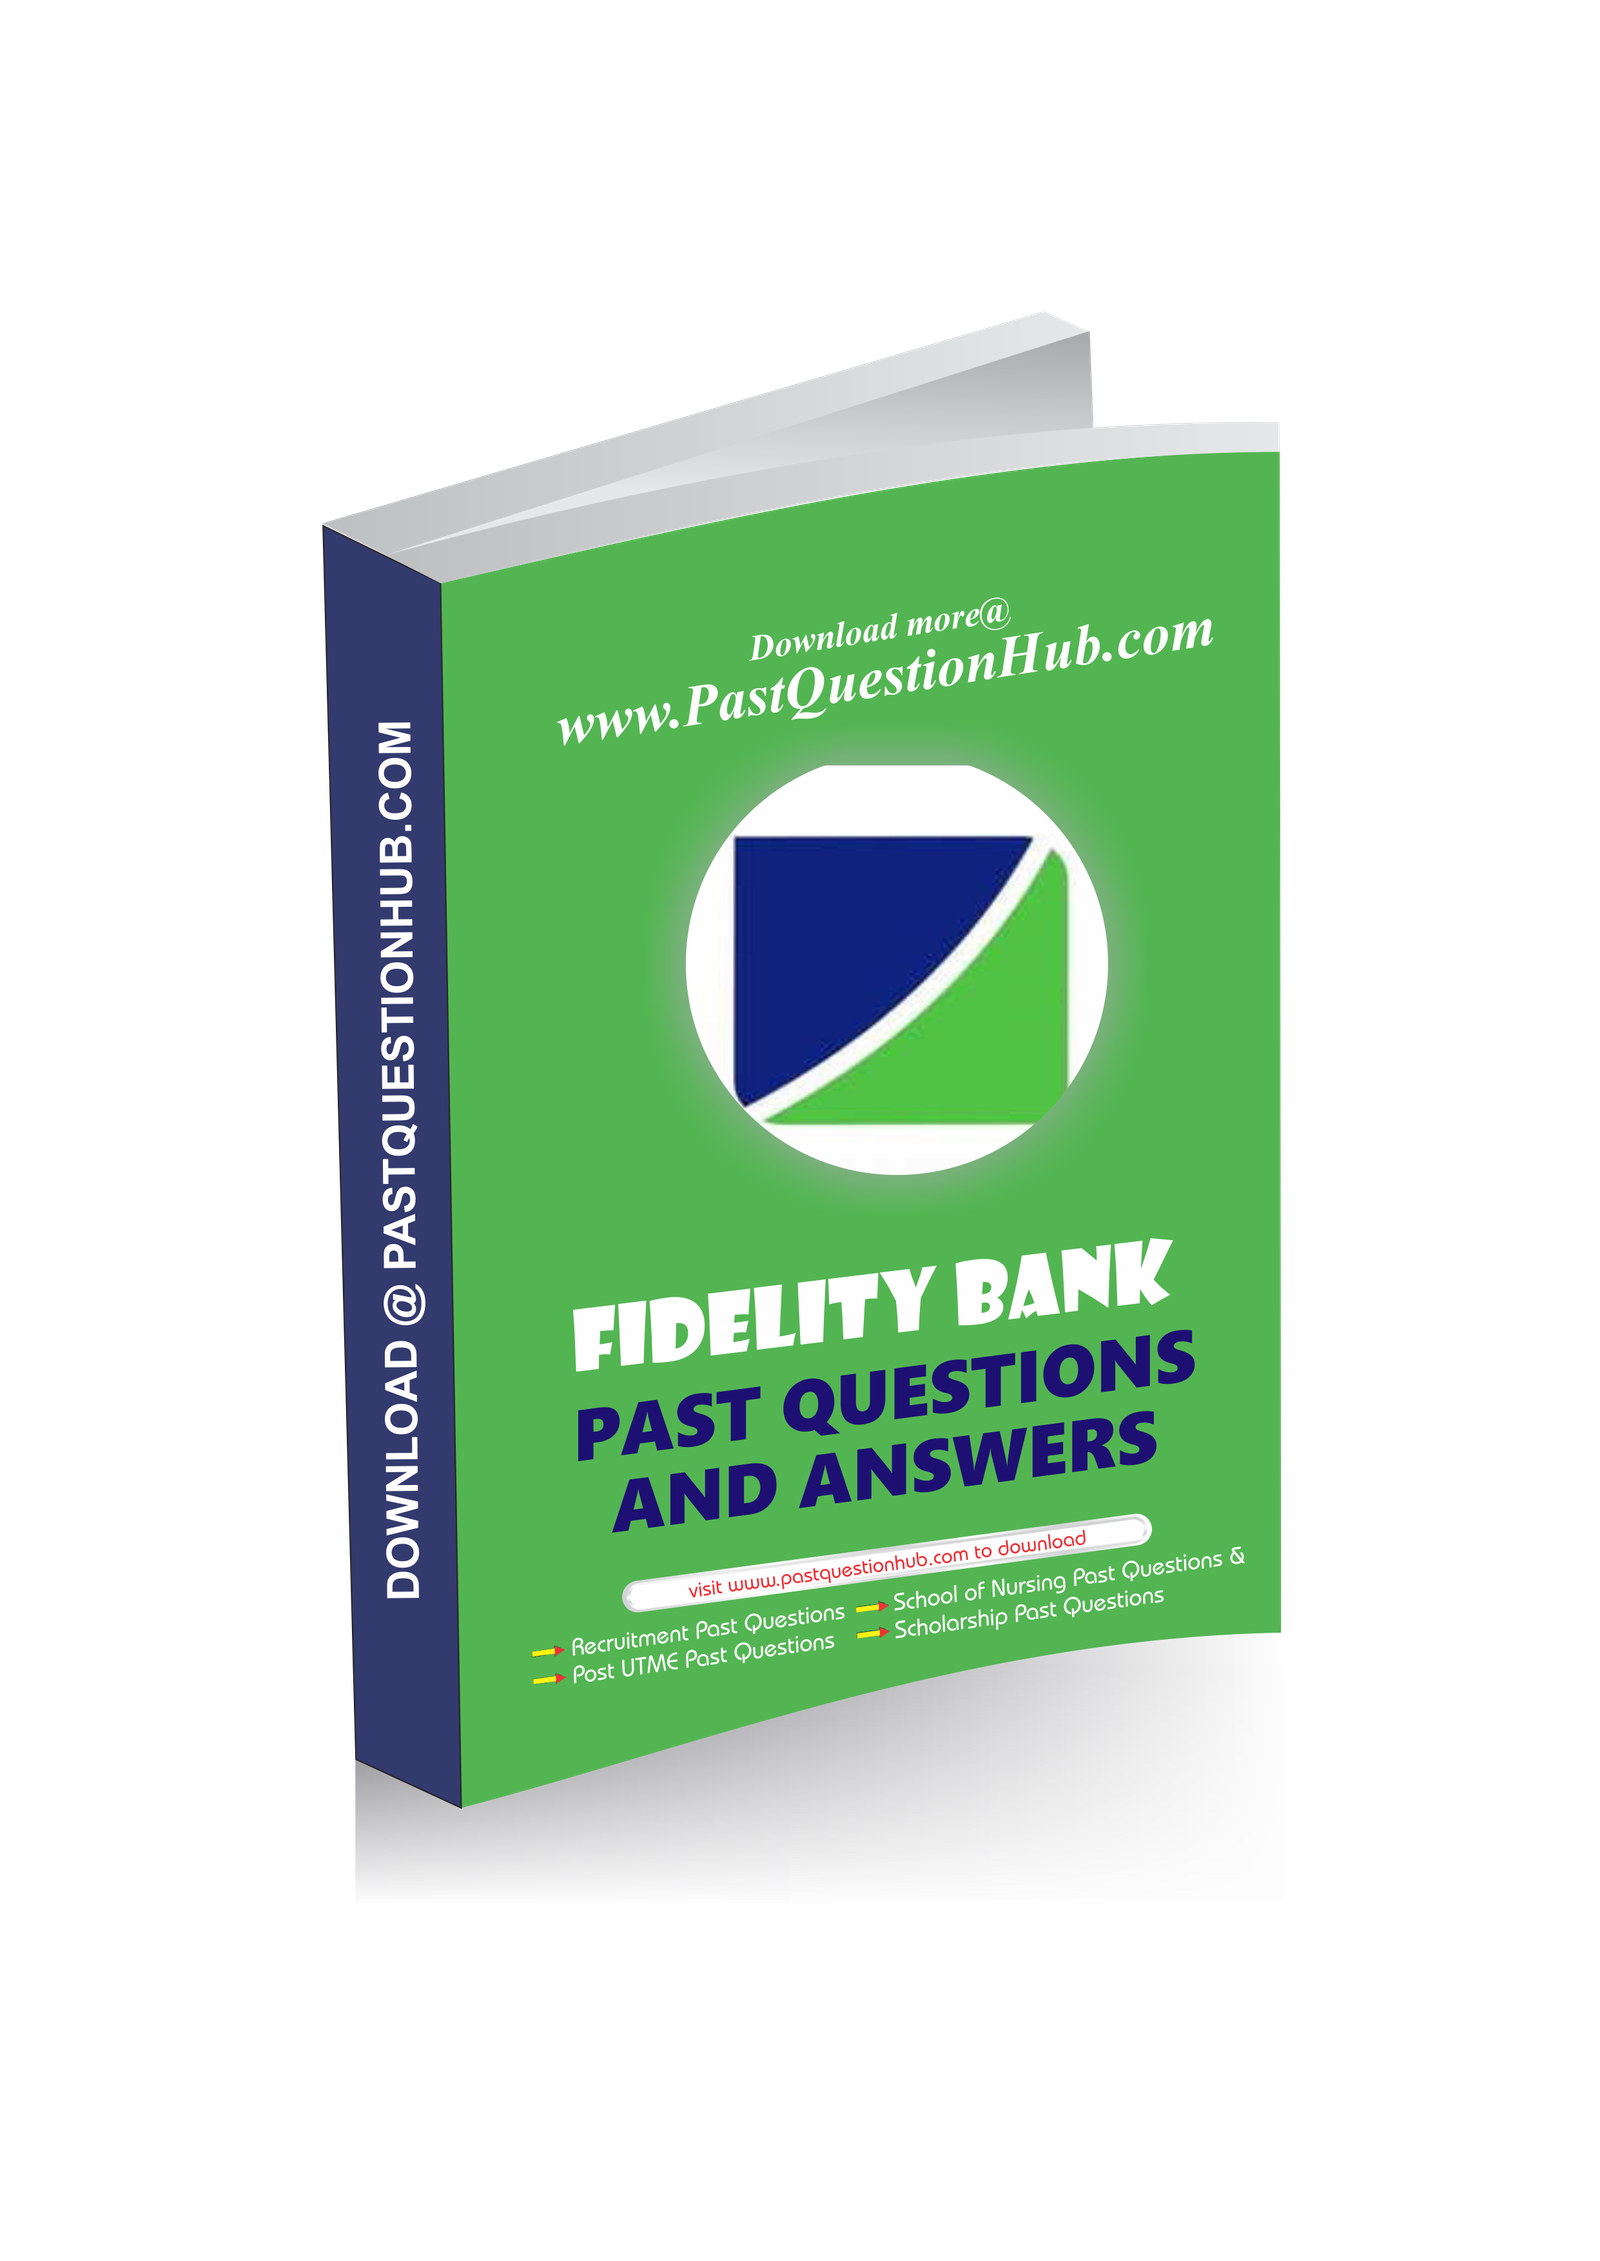 fidelity-bank-aptitude-test-past-questions-and-answers-pdf-download